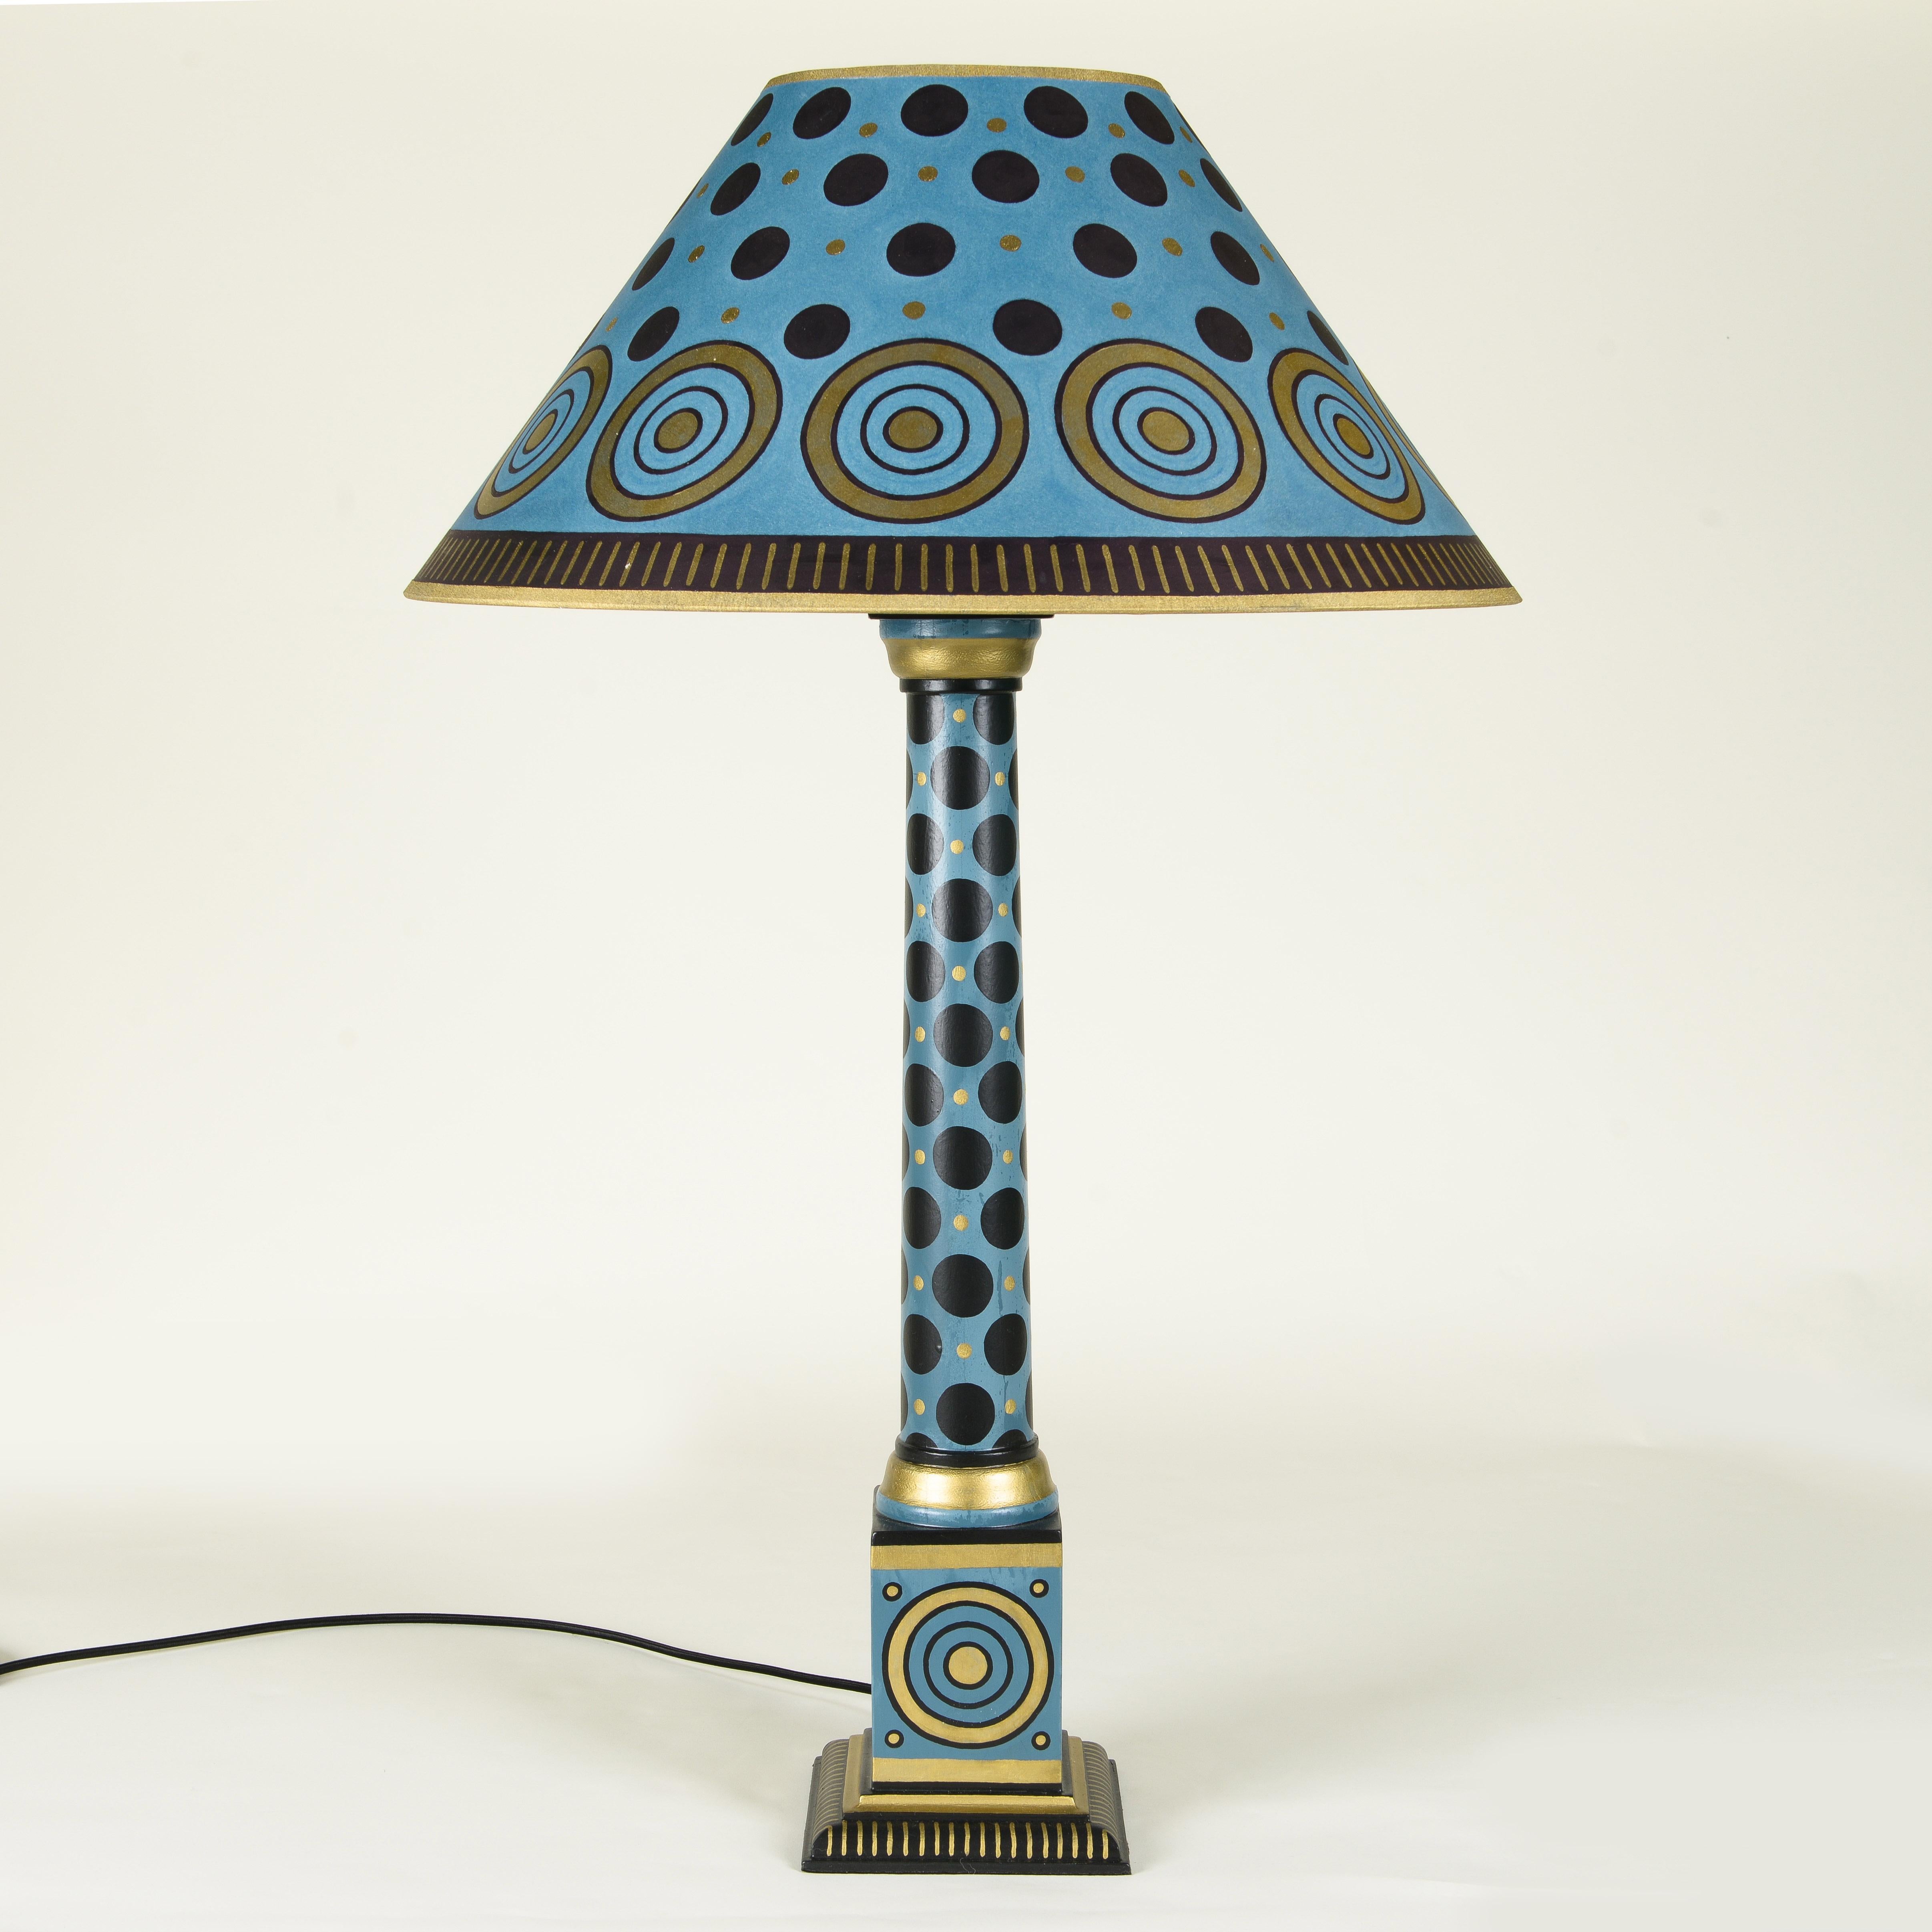 Pair of hand-painted column table lamps with a blue base color adorned with gold and black circular patterns.

Cressida Bell is a British designer specialising in textiles and interiors. From her London studio, she produces a wide range of products